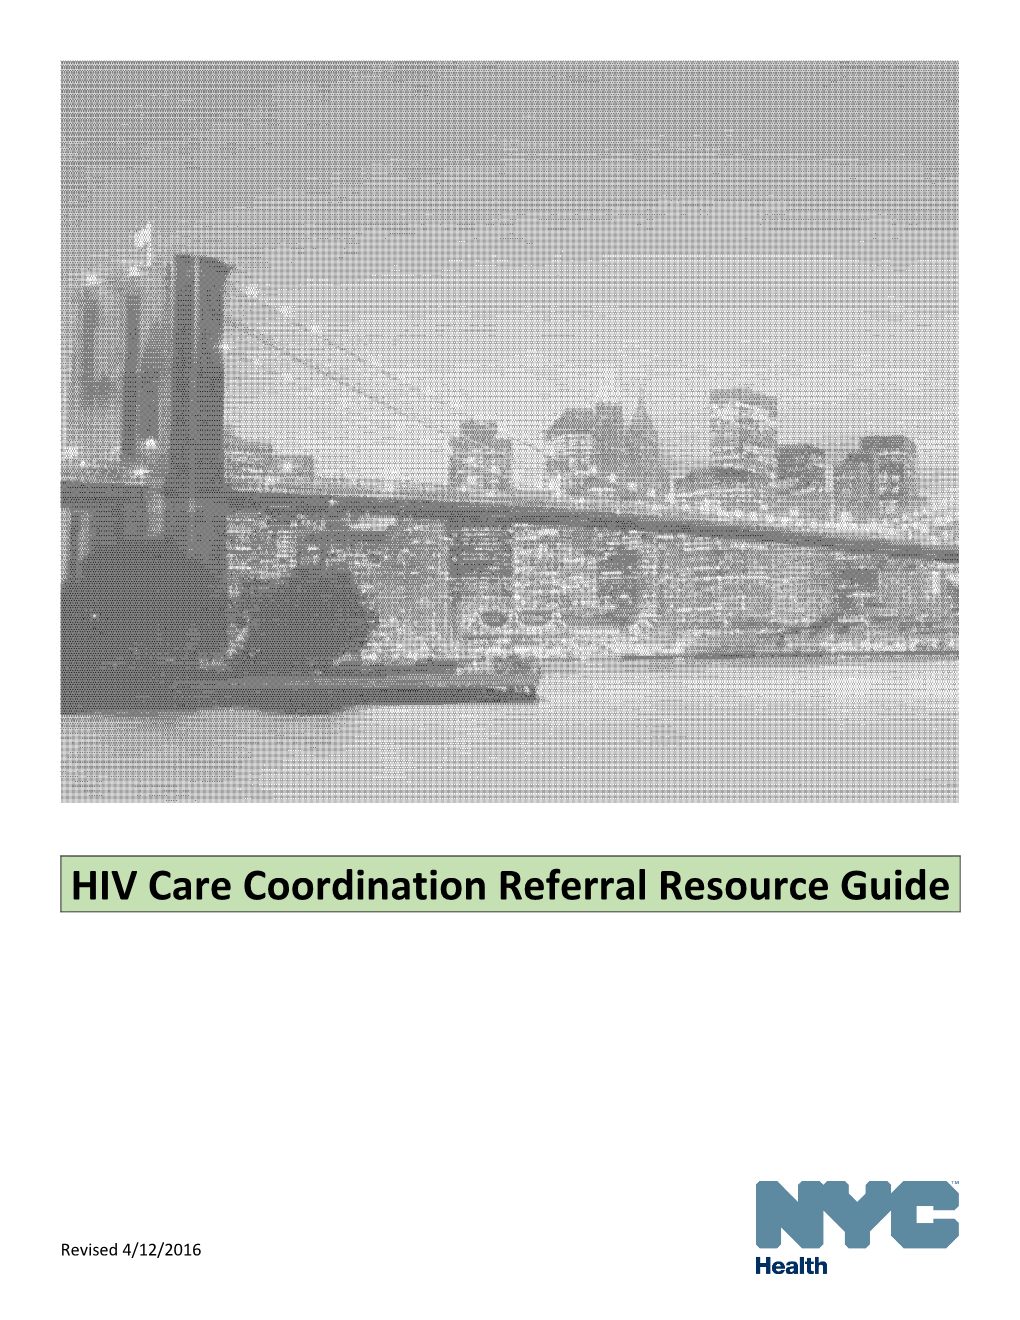 HIV Care Coordination Referral Resource Guide